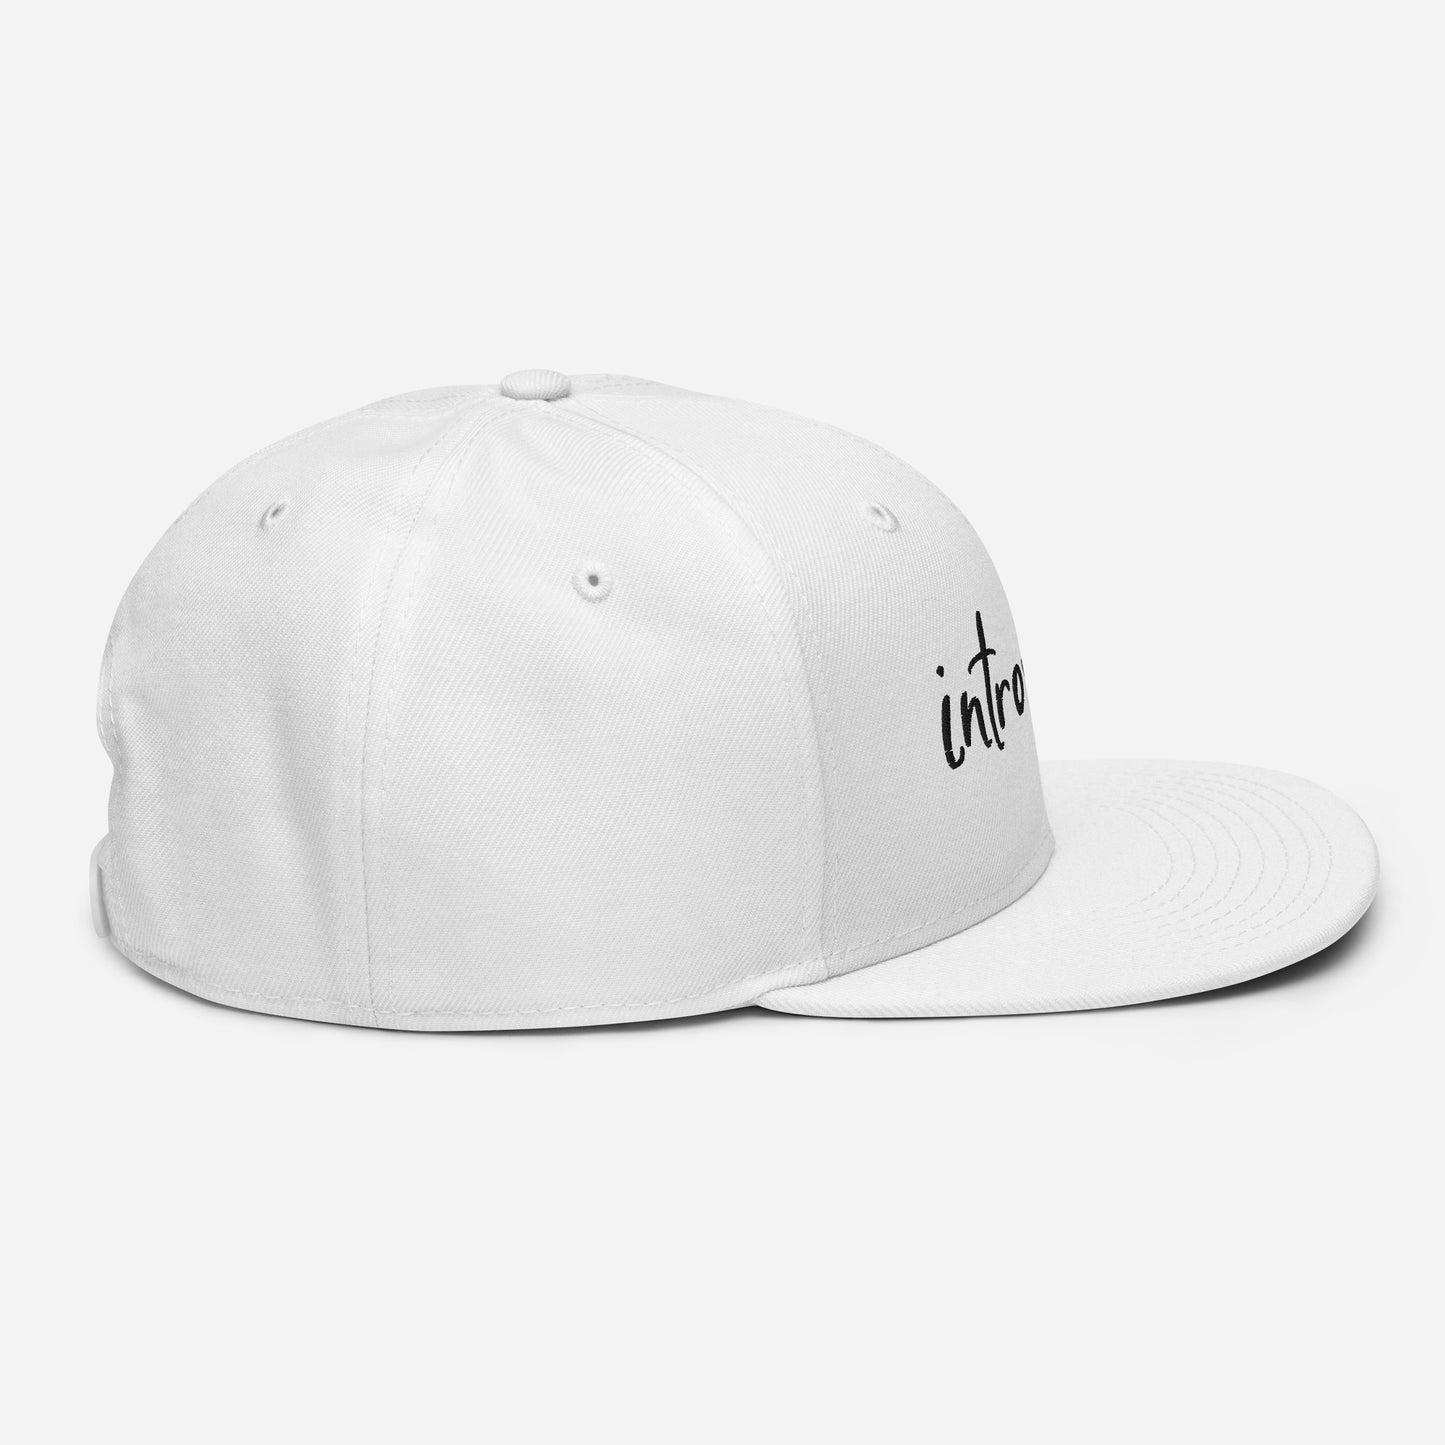 Embroidered snapback hat "introvert"